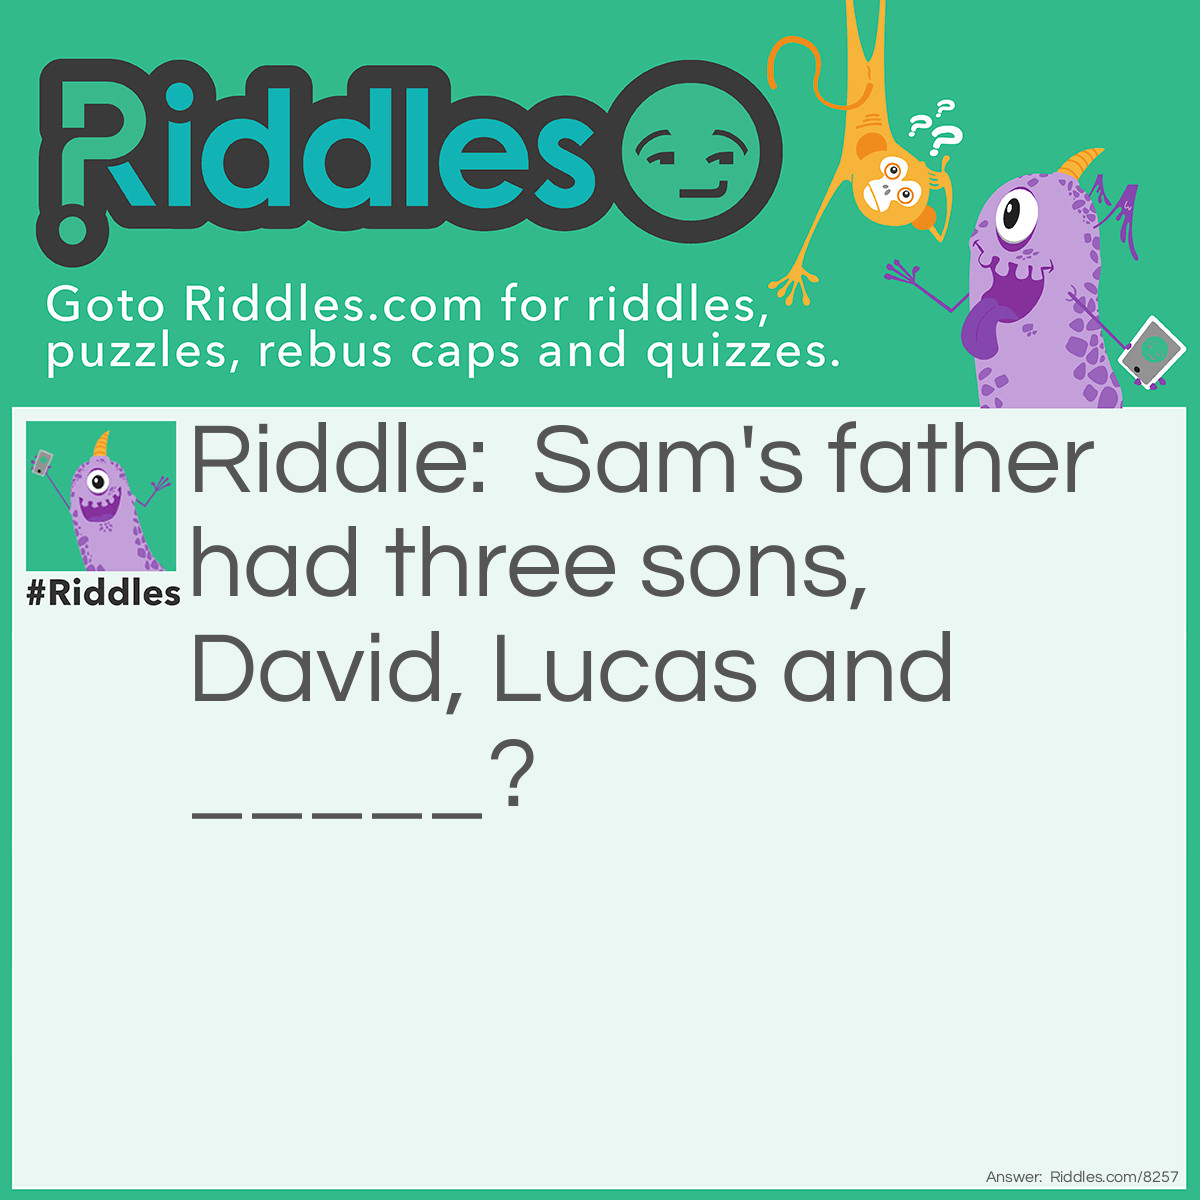 Riddle: Sam's father had three sons, David, Lucas and _____? Answer: Sam